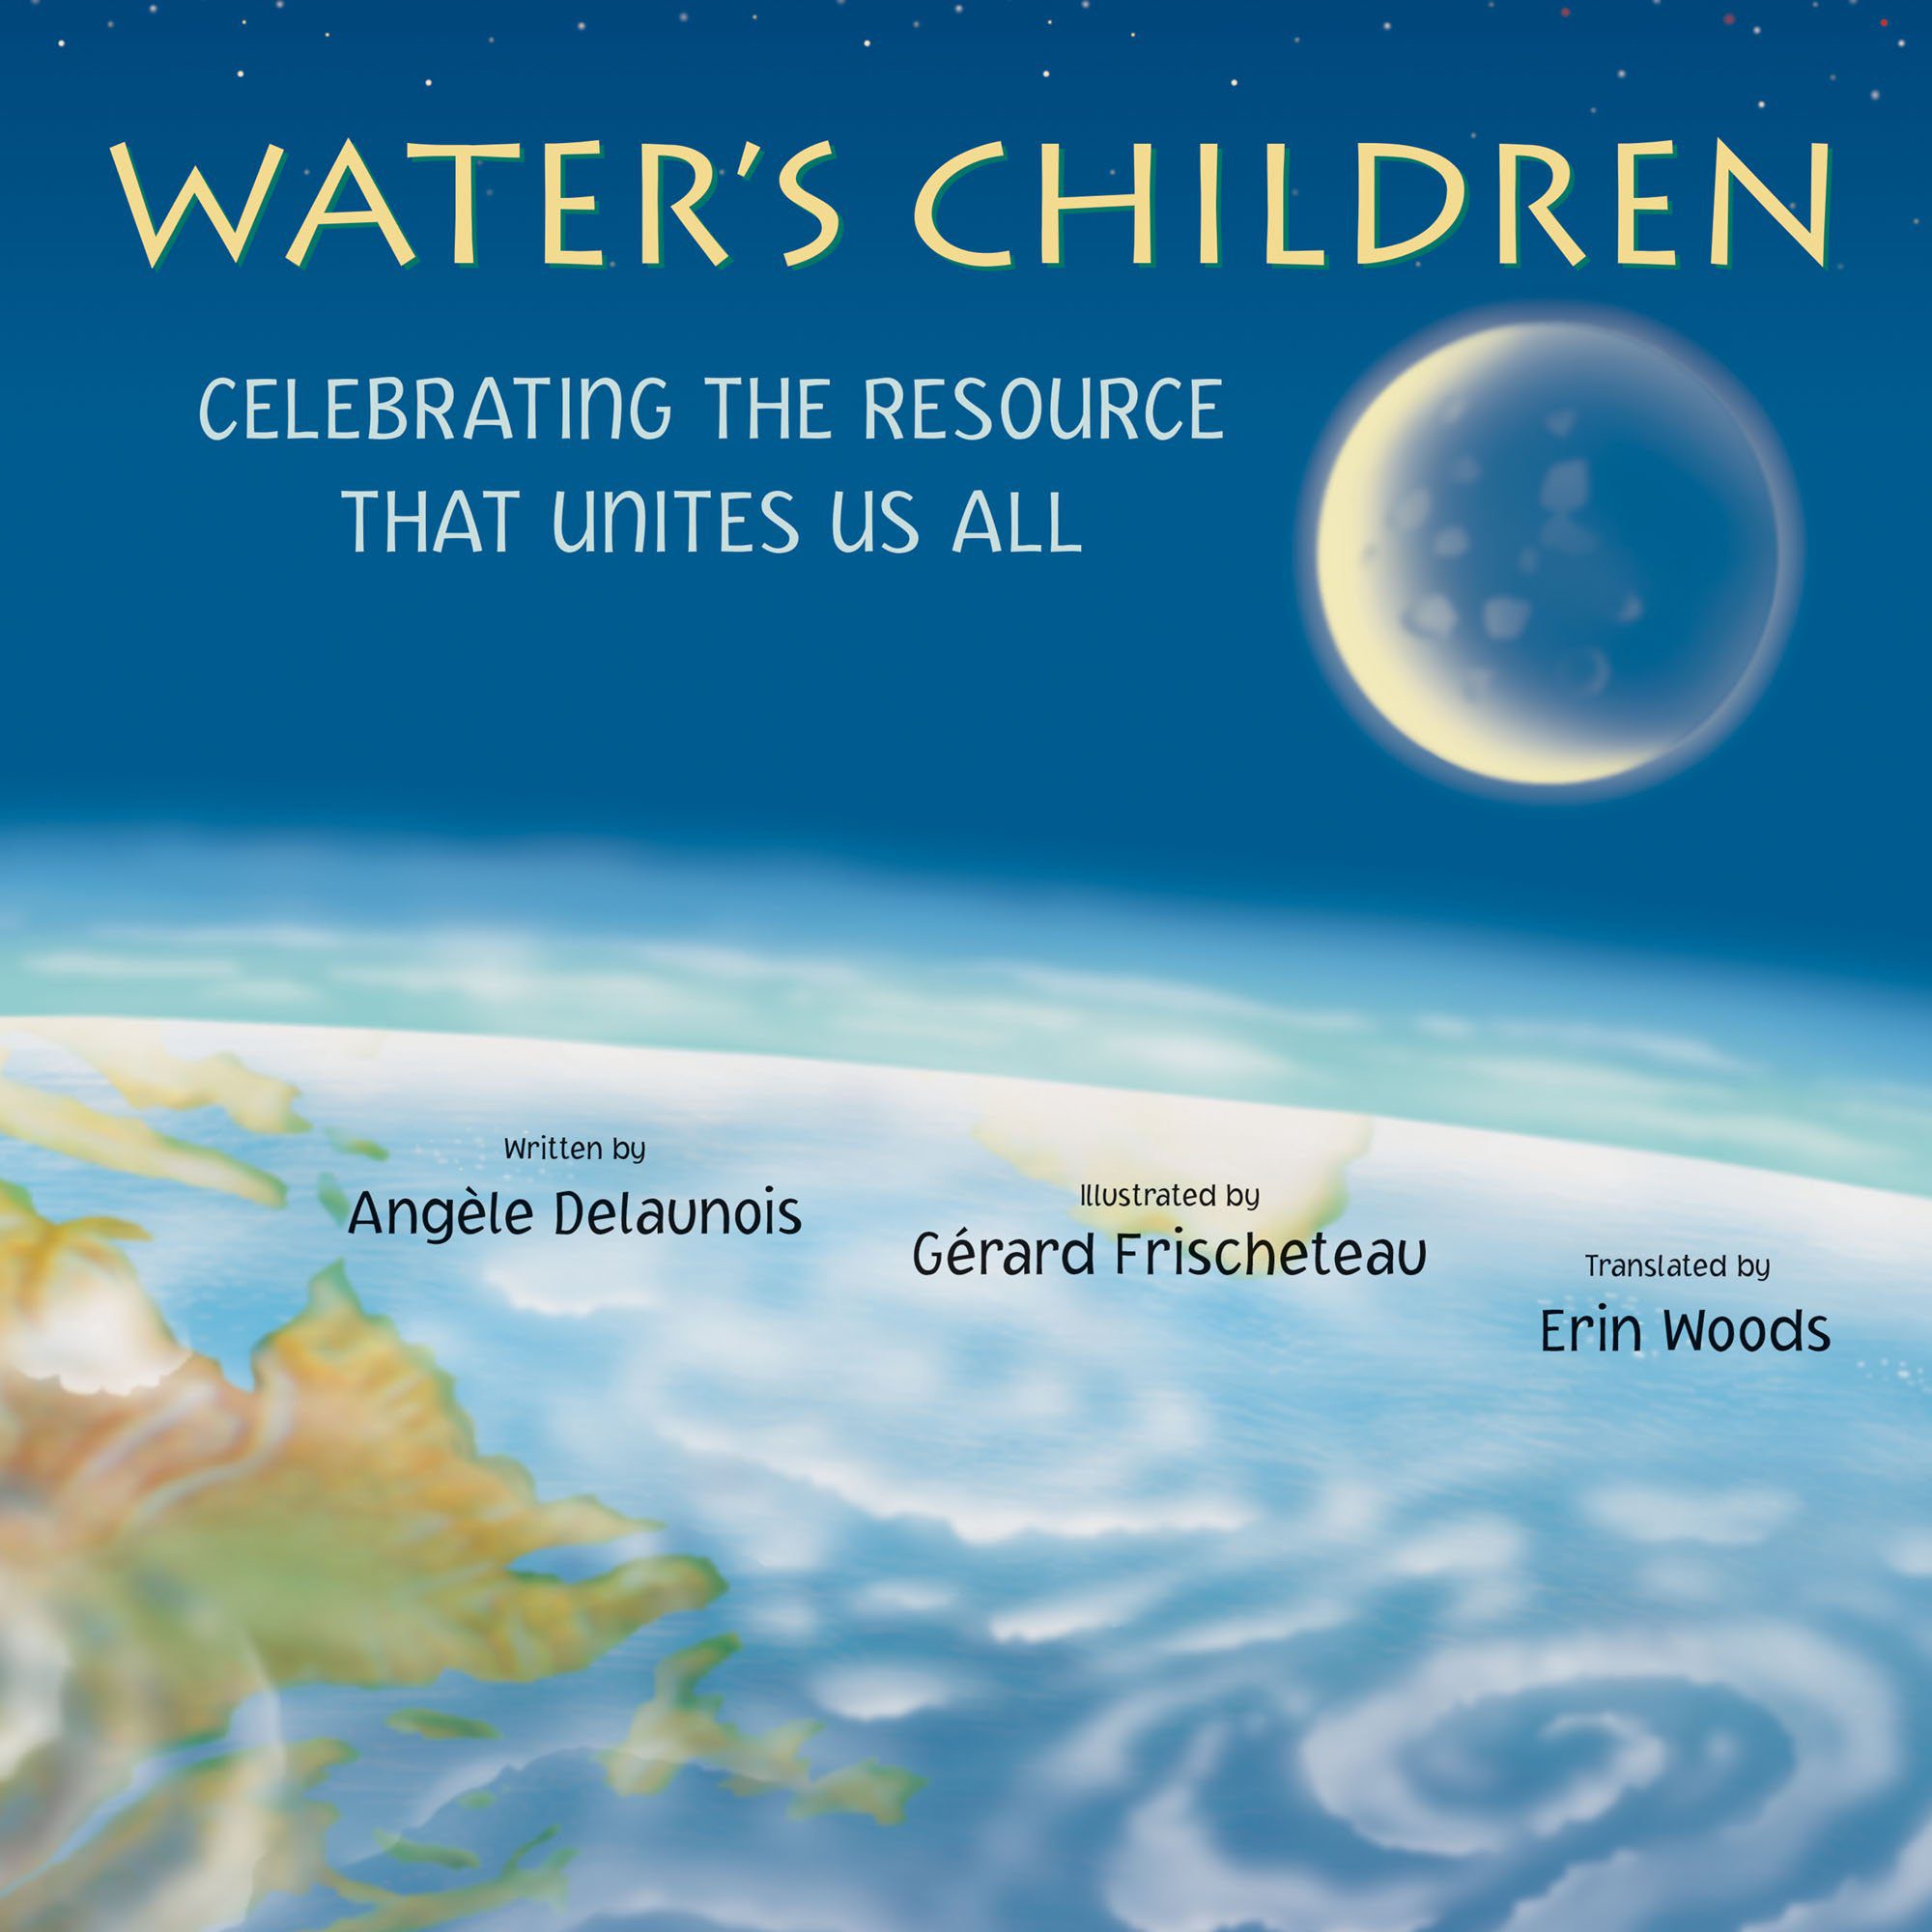 Water's Children: Celebrating the Resource That Unites Us All